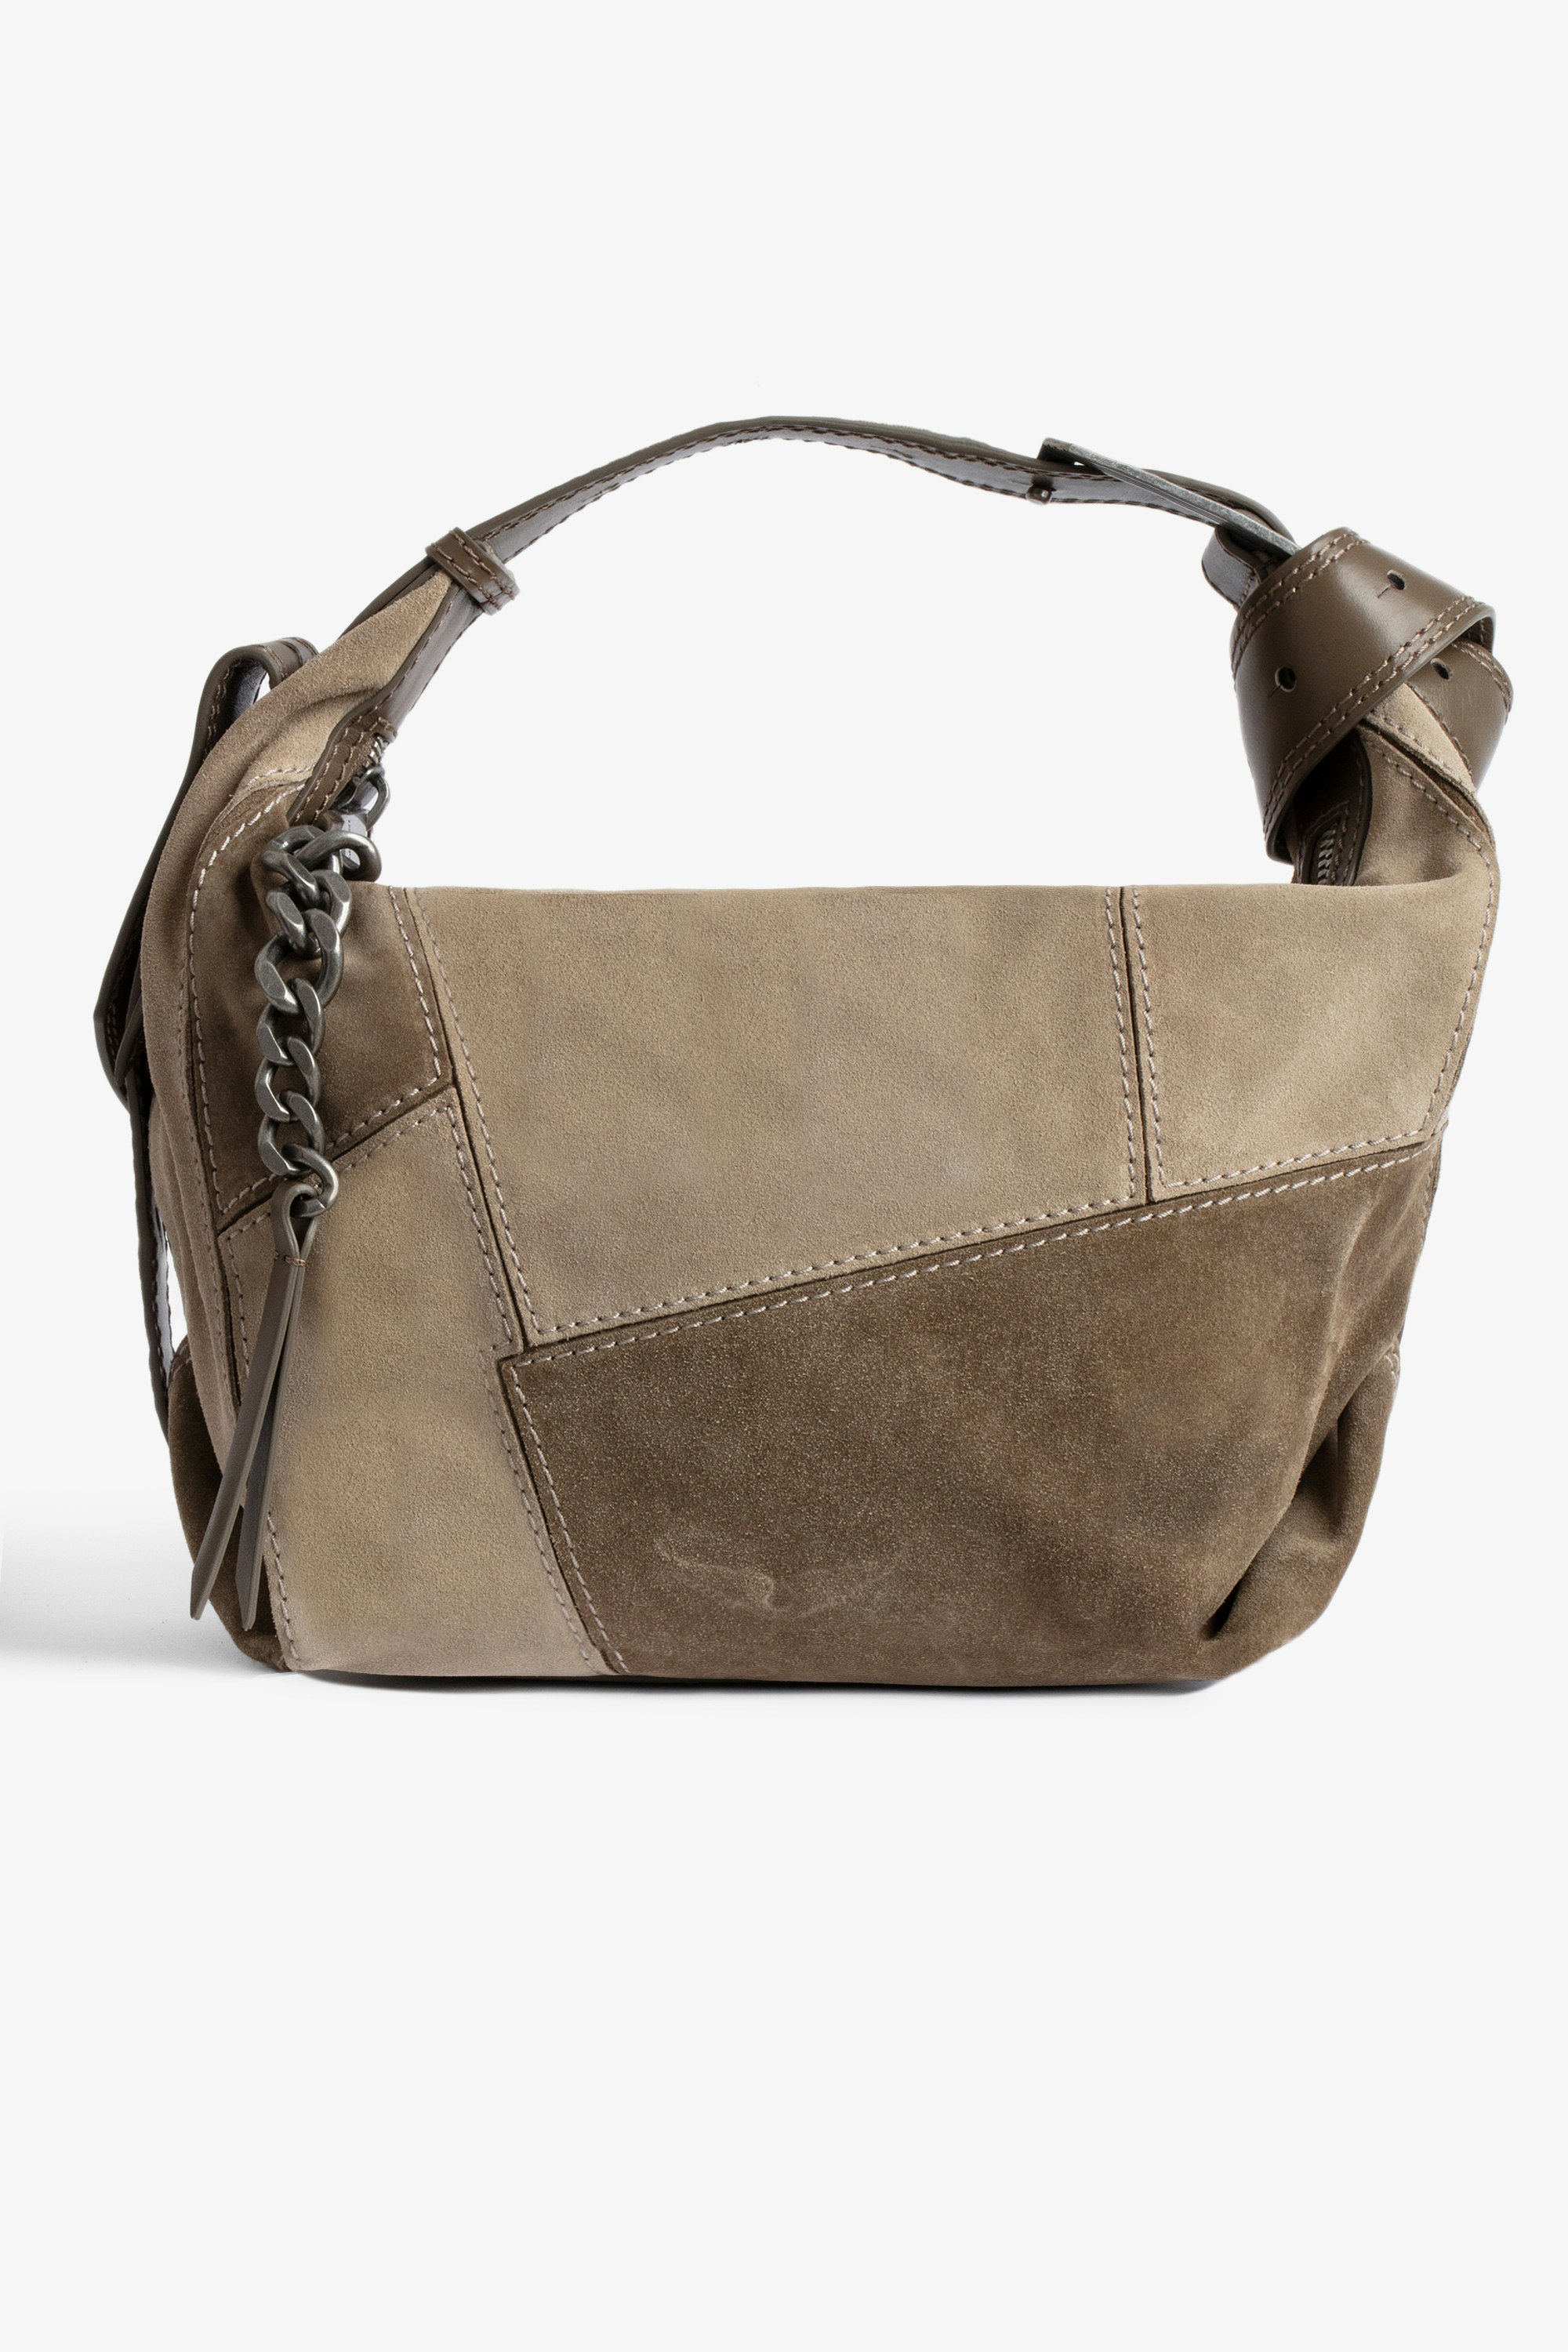 Le Cecilia Suede Patchwork バッグ Women’s bag worn over the shoulder or across the body in patchwork of beige suede